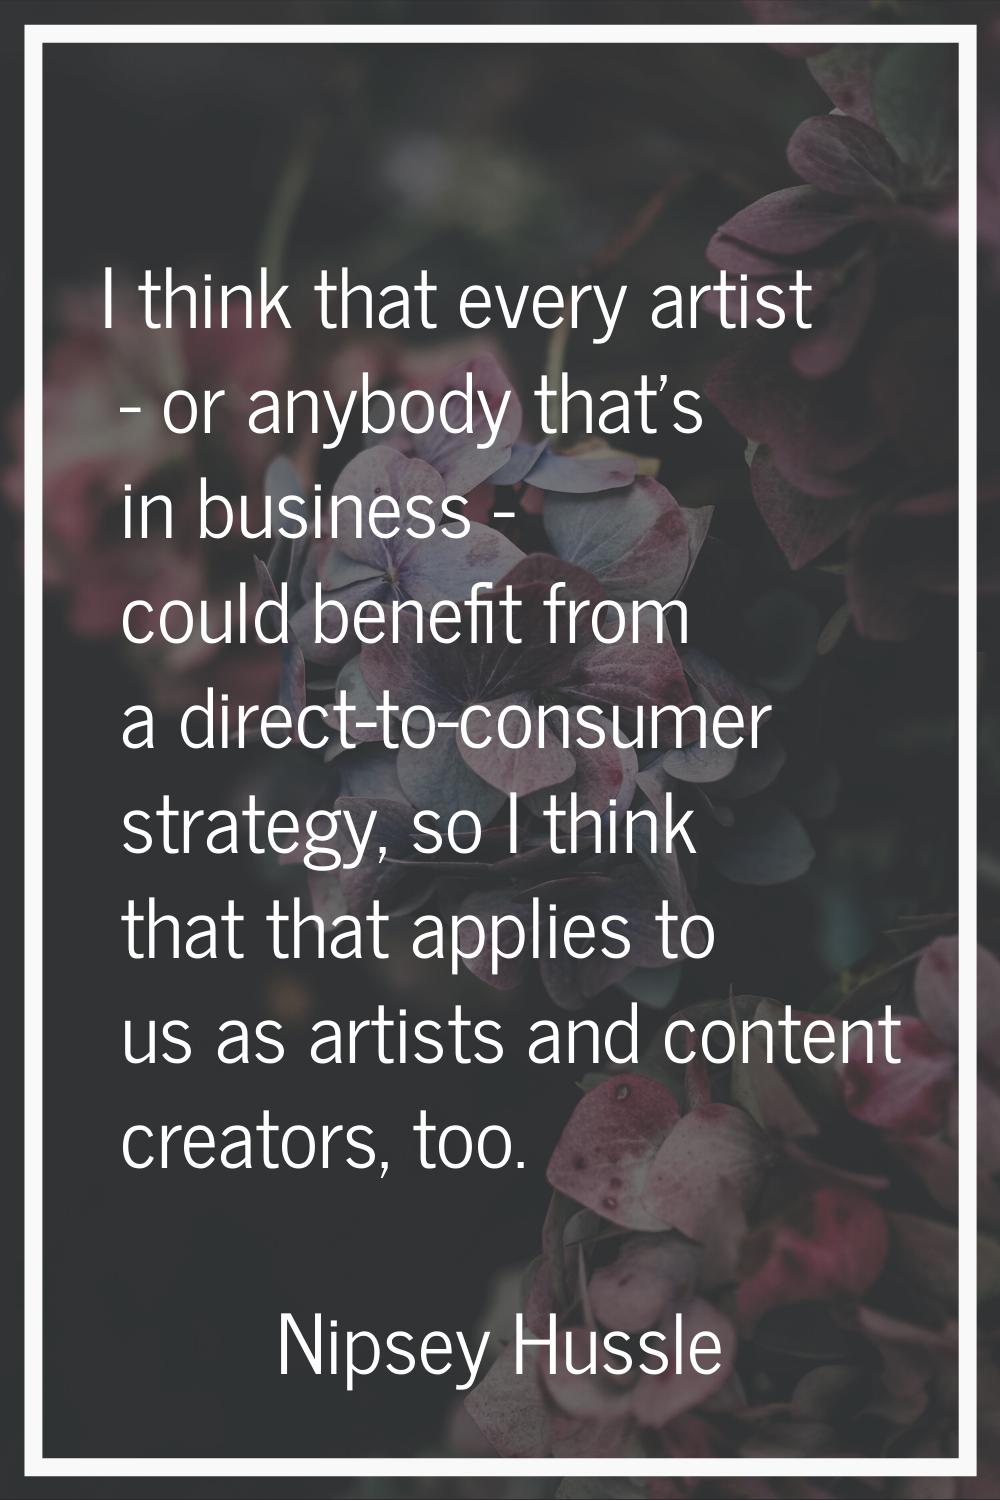 I think that every artist - or anybody that's in business - could benefit from a direct-to-consumer